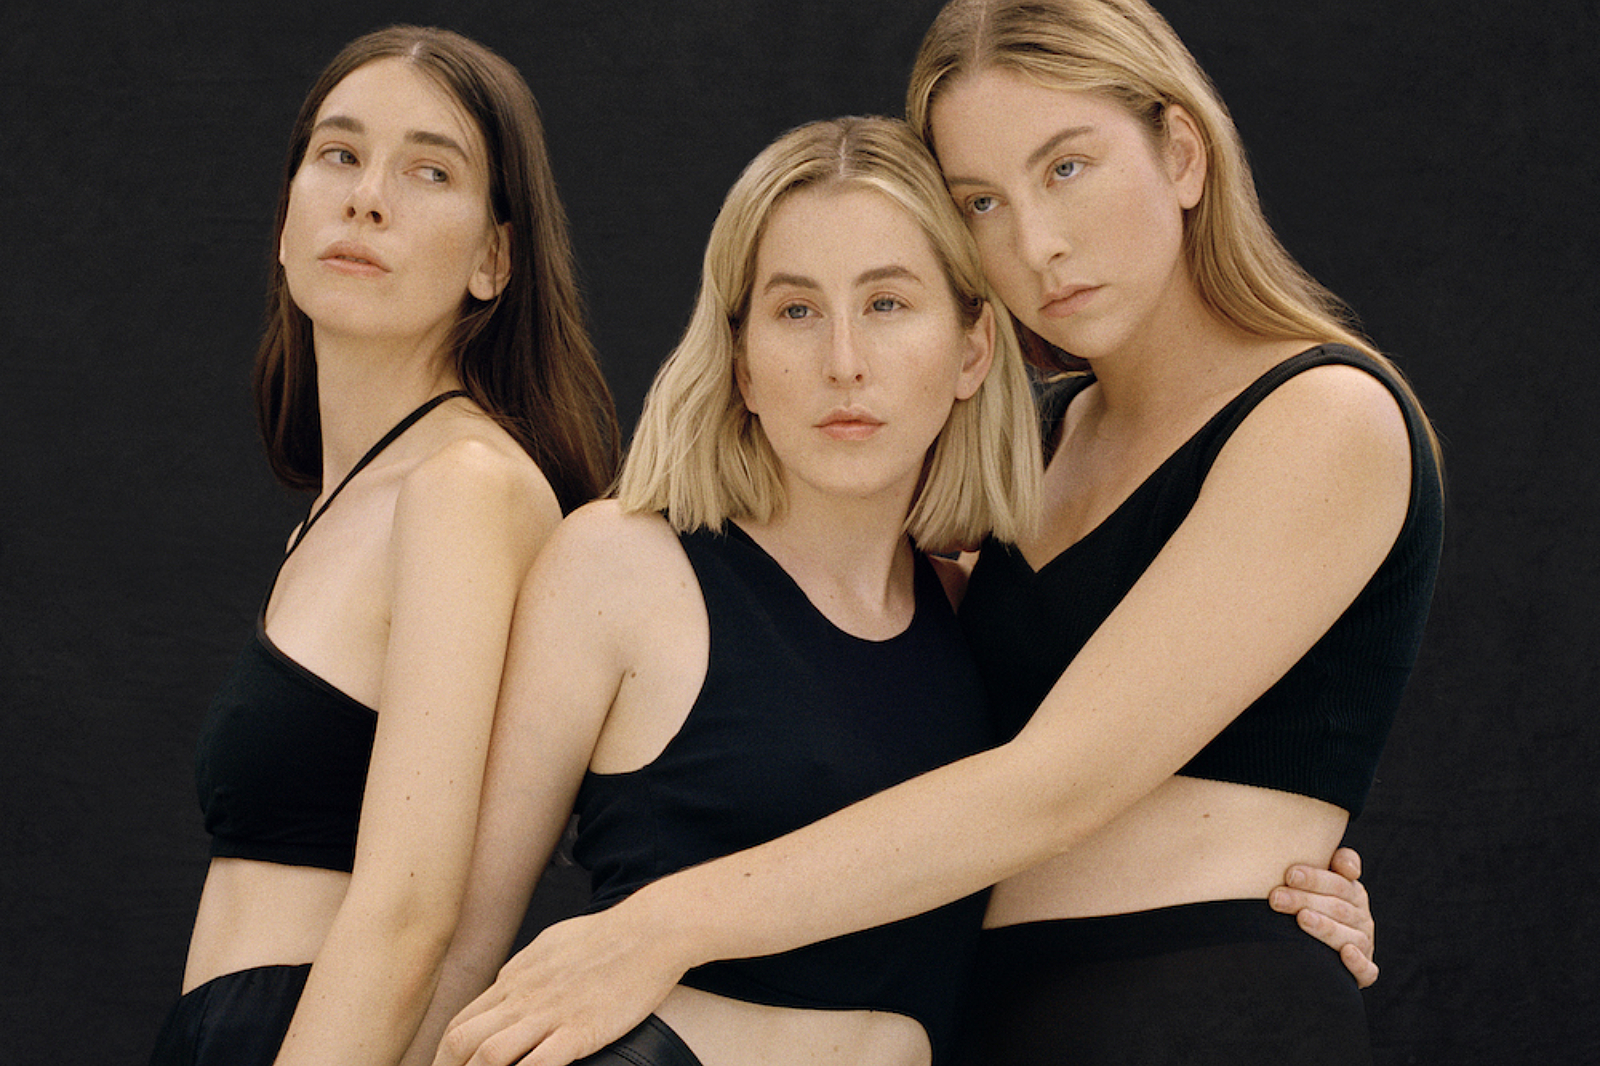 Haim release new track 'Cherry Flavored Stomach Ache'